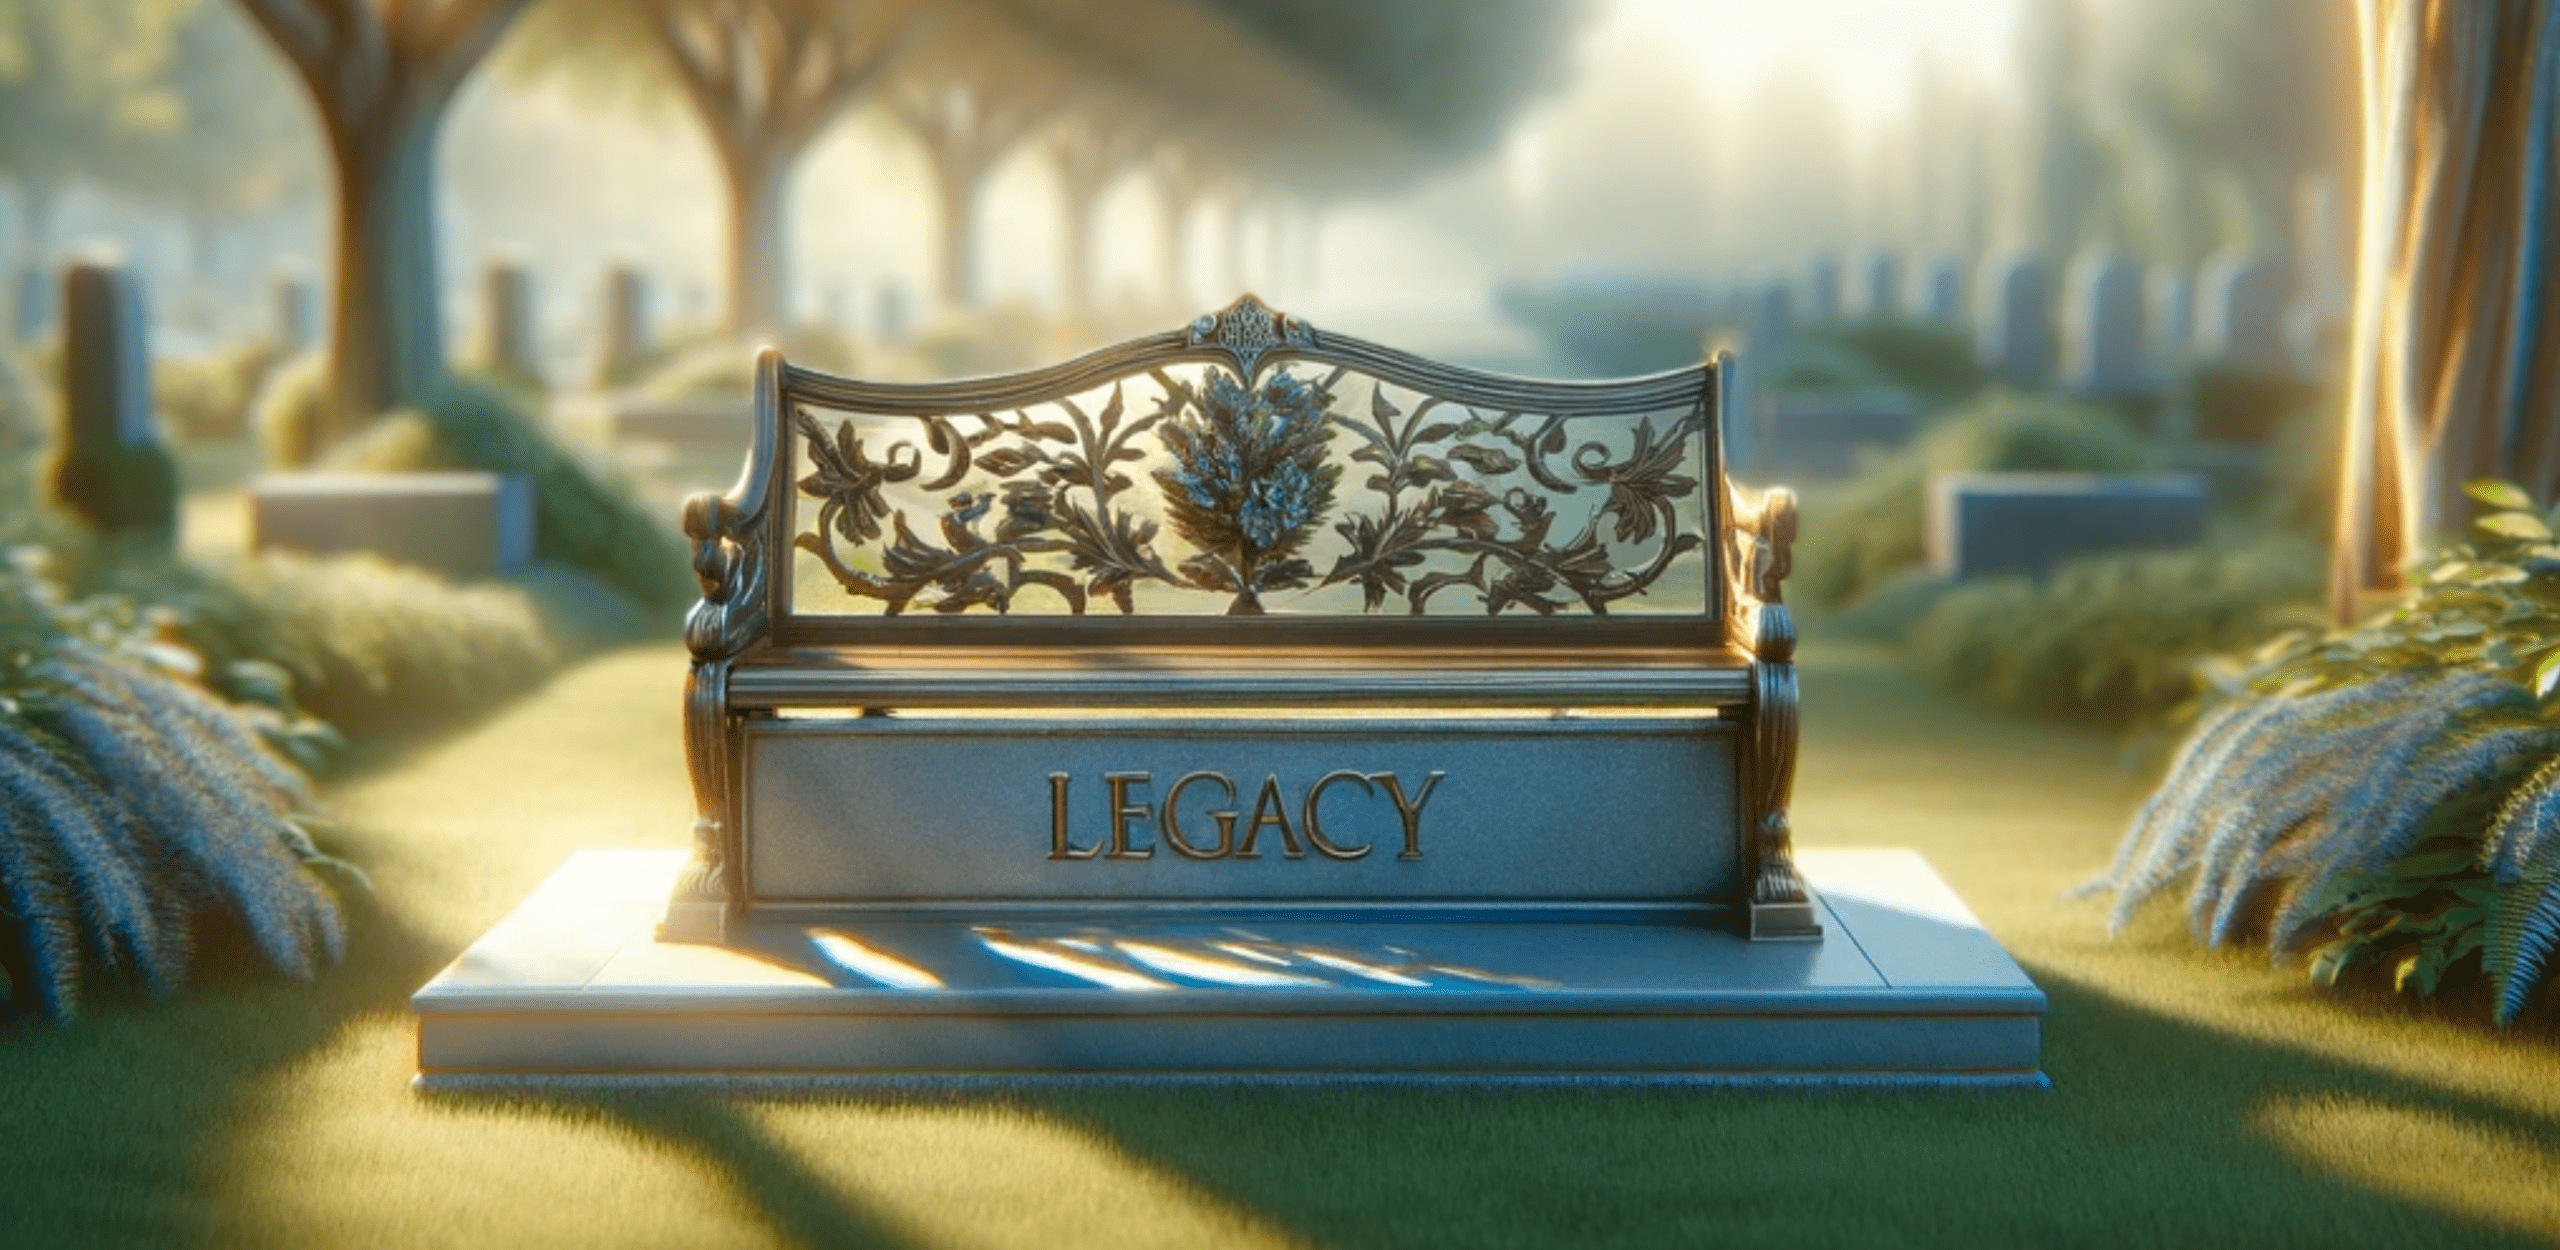 Bench at Cemetery to remind about pre-planning